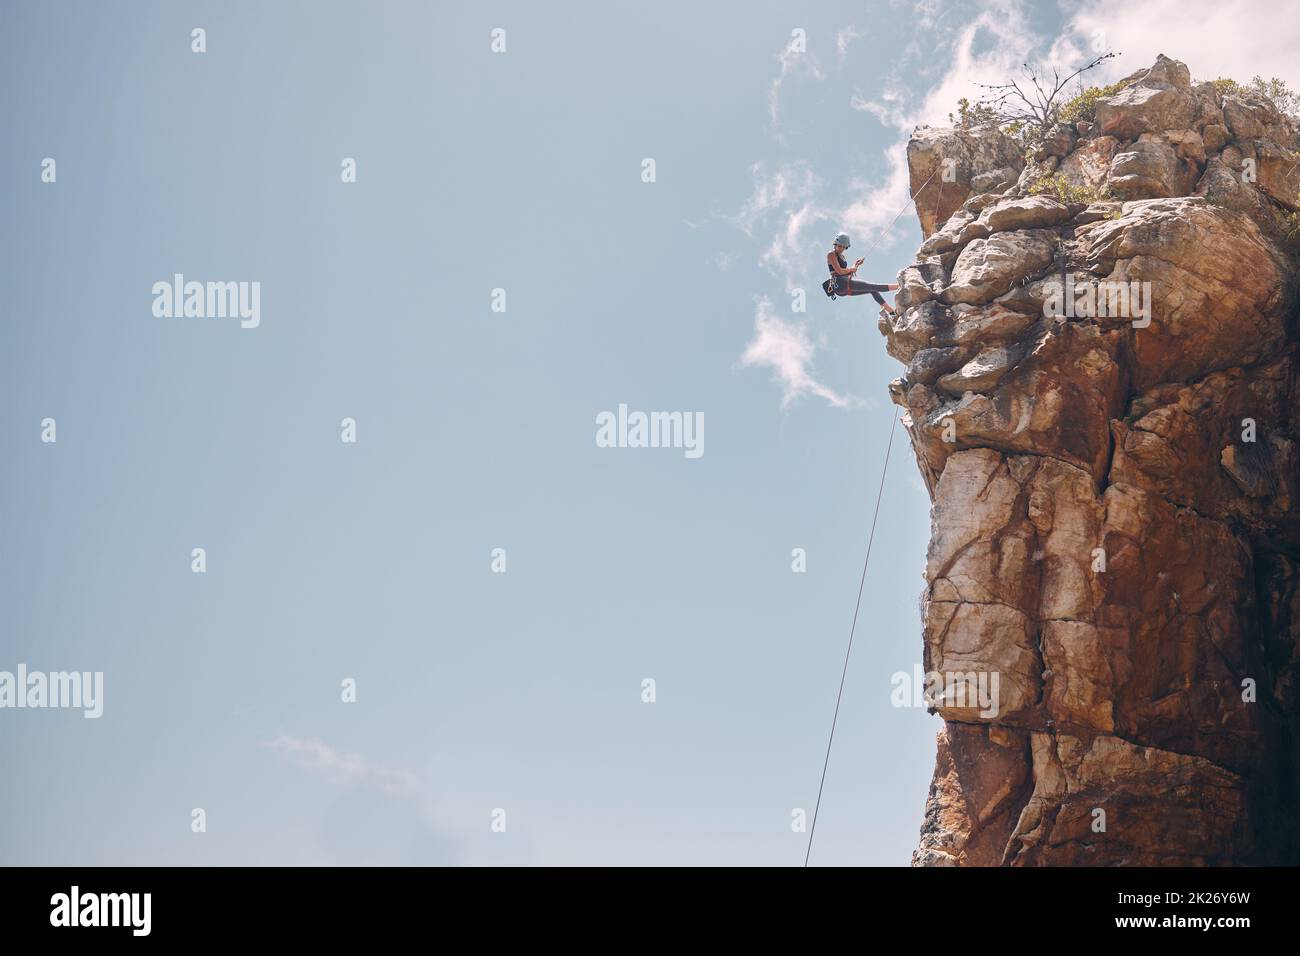 Mockup blue sky, mountain climbing woman and rock wall fearless hiking on abseiling training rope outdoor. Healthy fitness risk, adventure freedom Stock Photo